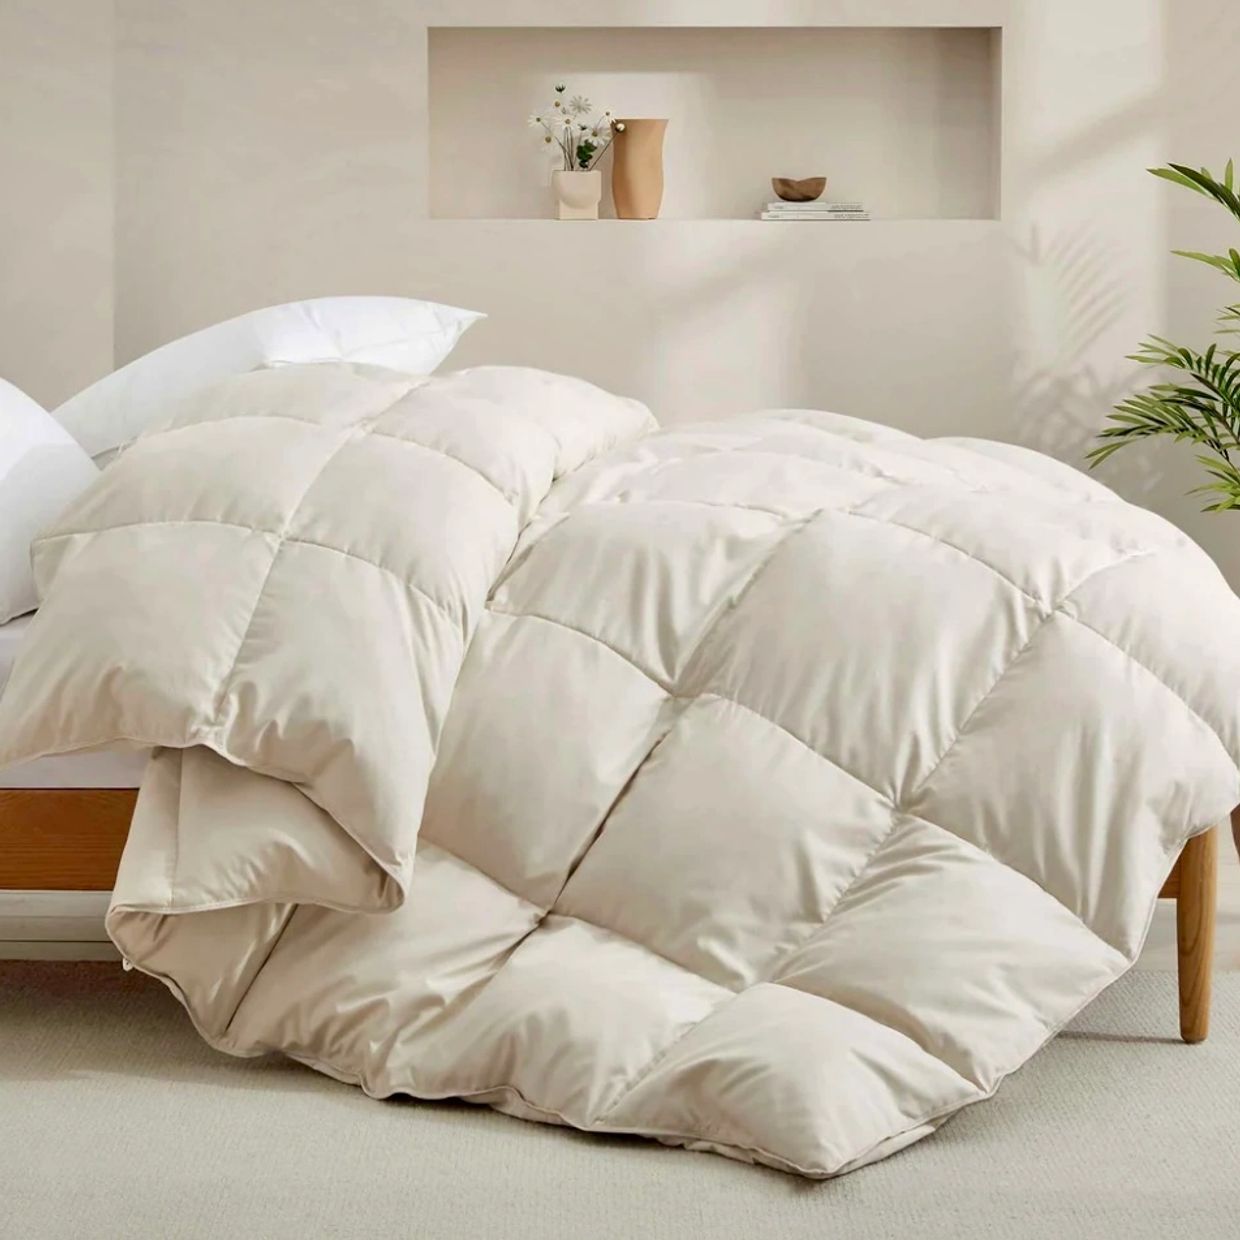 We now order and stock Down Comforters 